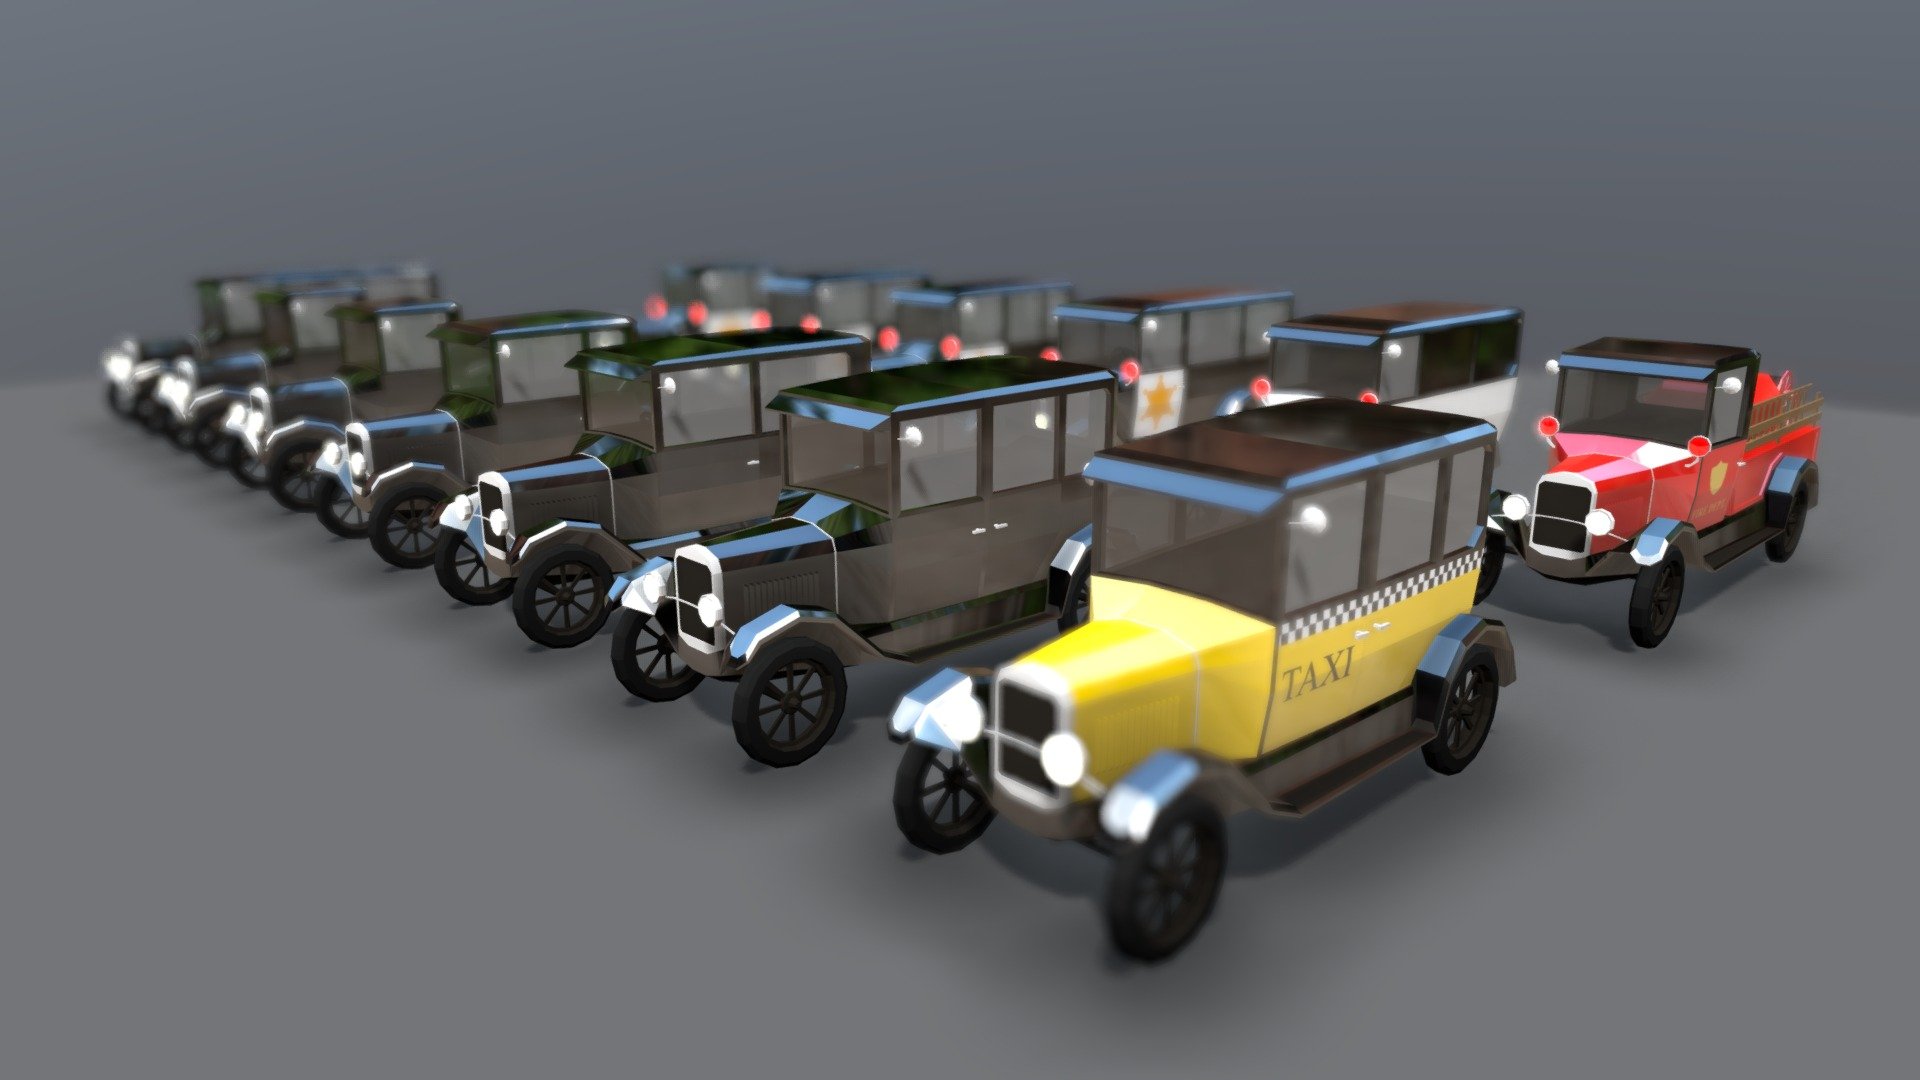 This car pack represents cars from the mid 1920'.

It features a emergency vehicles and a bunch of normal ordinary citizen vehicles.

Doors, windows and tires are separate models, so this pack is very suitable for GTA like style games.

It can be downloaded on the Unity Asset Store for 24.99 USD 3d model